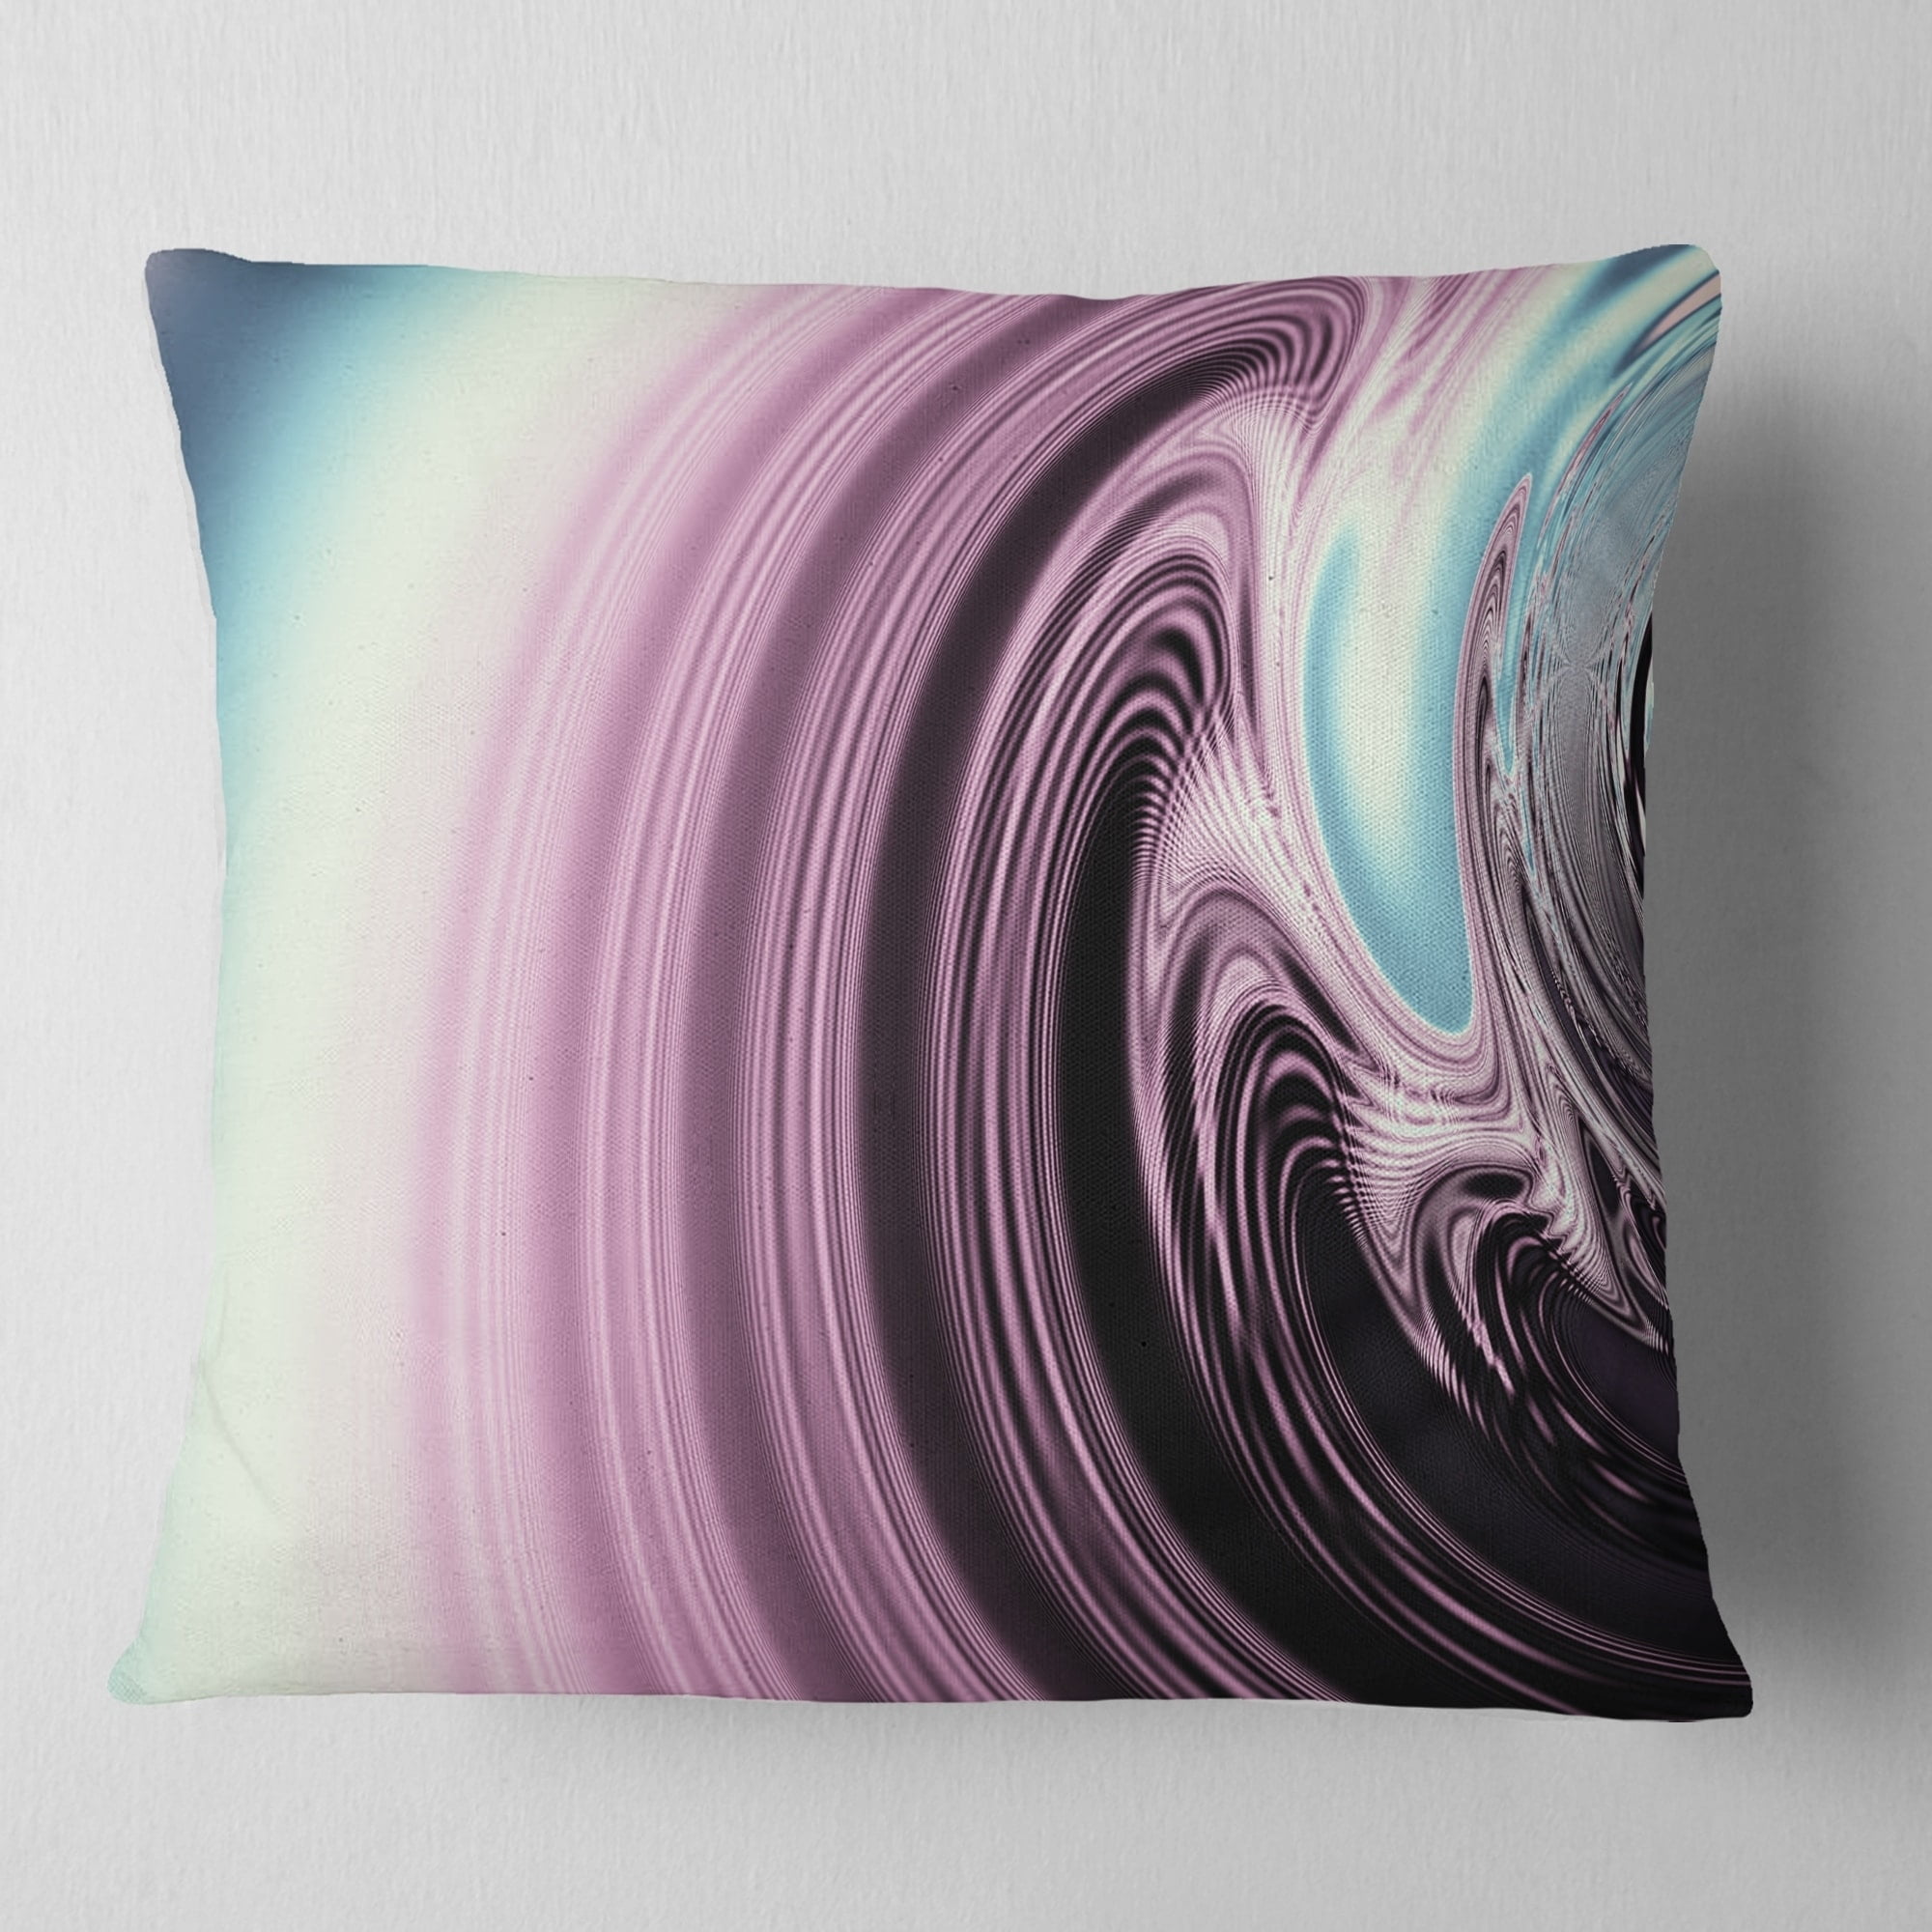 in Sofa Throw Pillow 18 in Designart CU14165-18-18 Colorful Fractal Fire Design on Black Abstract Cushion Cover for Living Room x 18 in